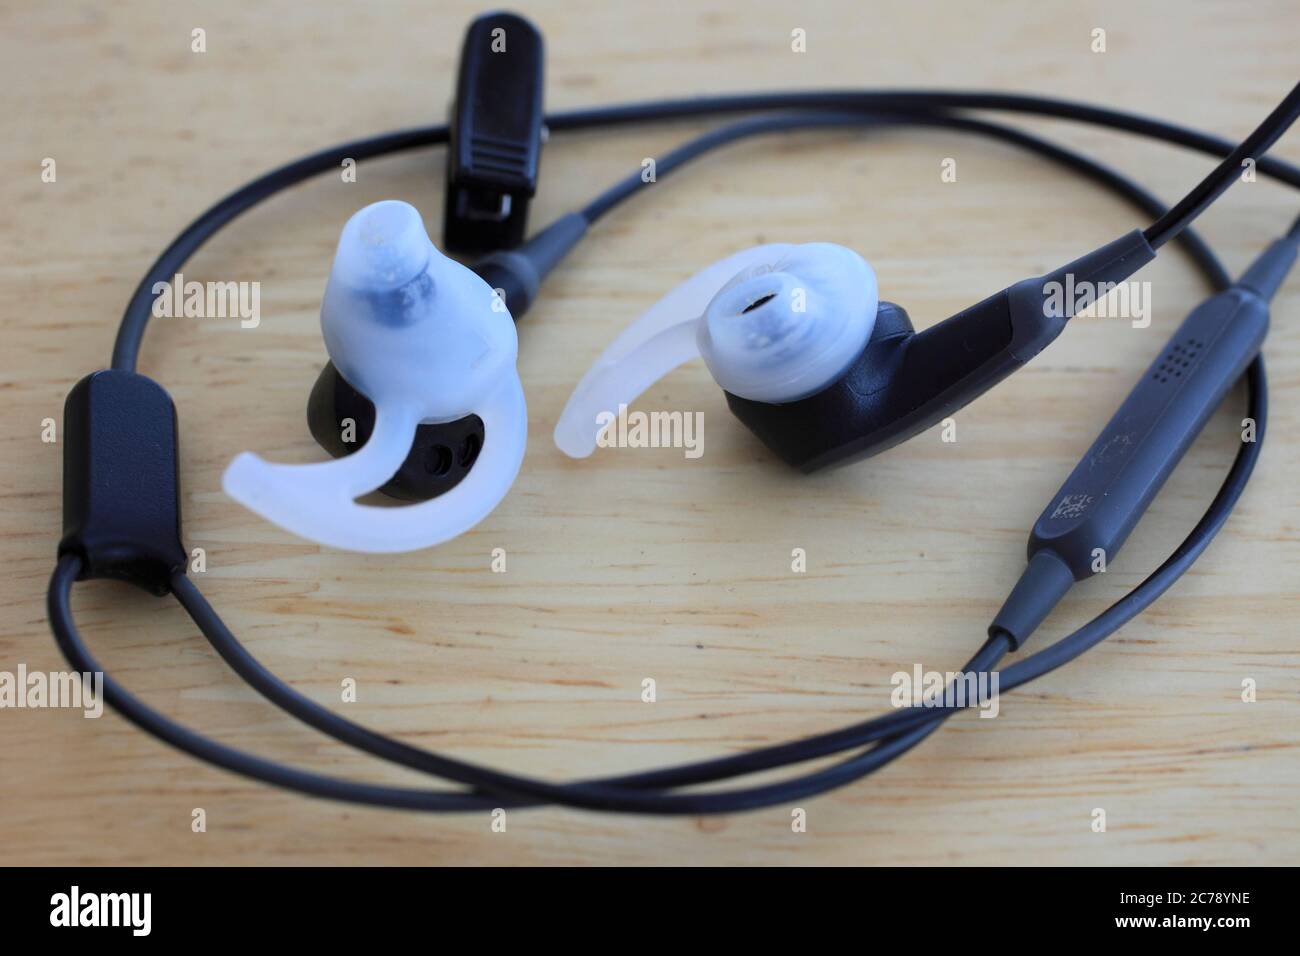 Bose Headphones High Resolution Stock Photography and Images - Alamy